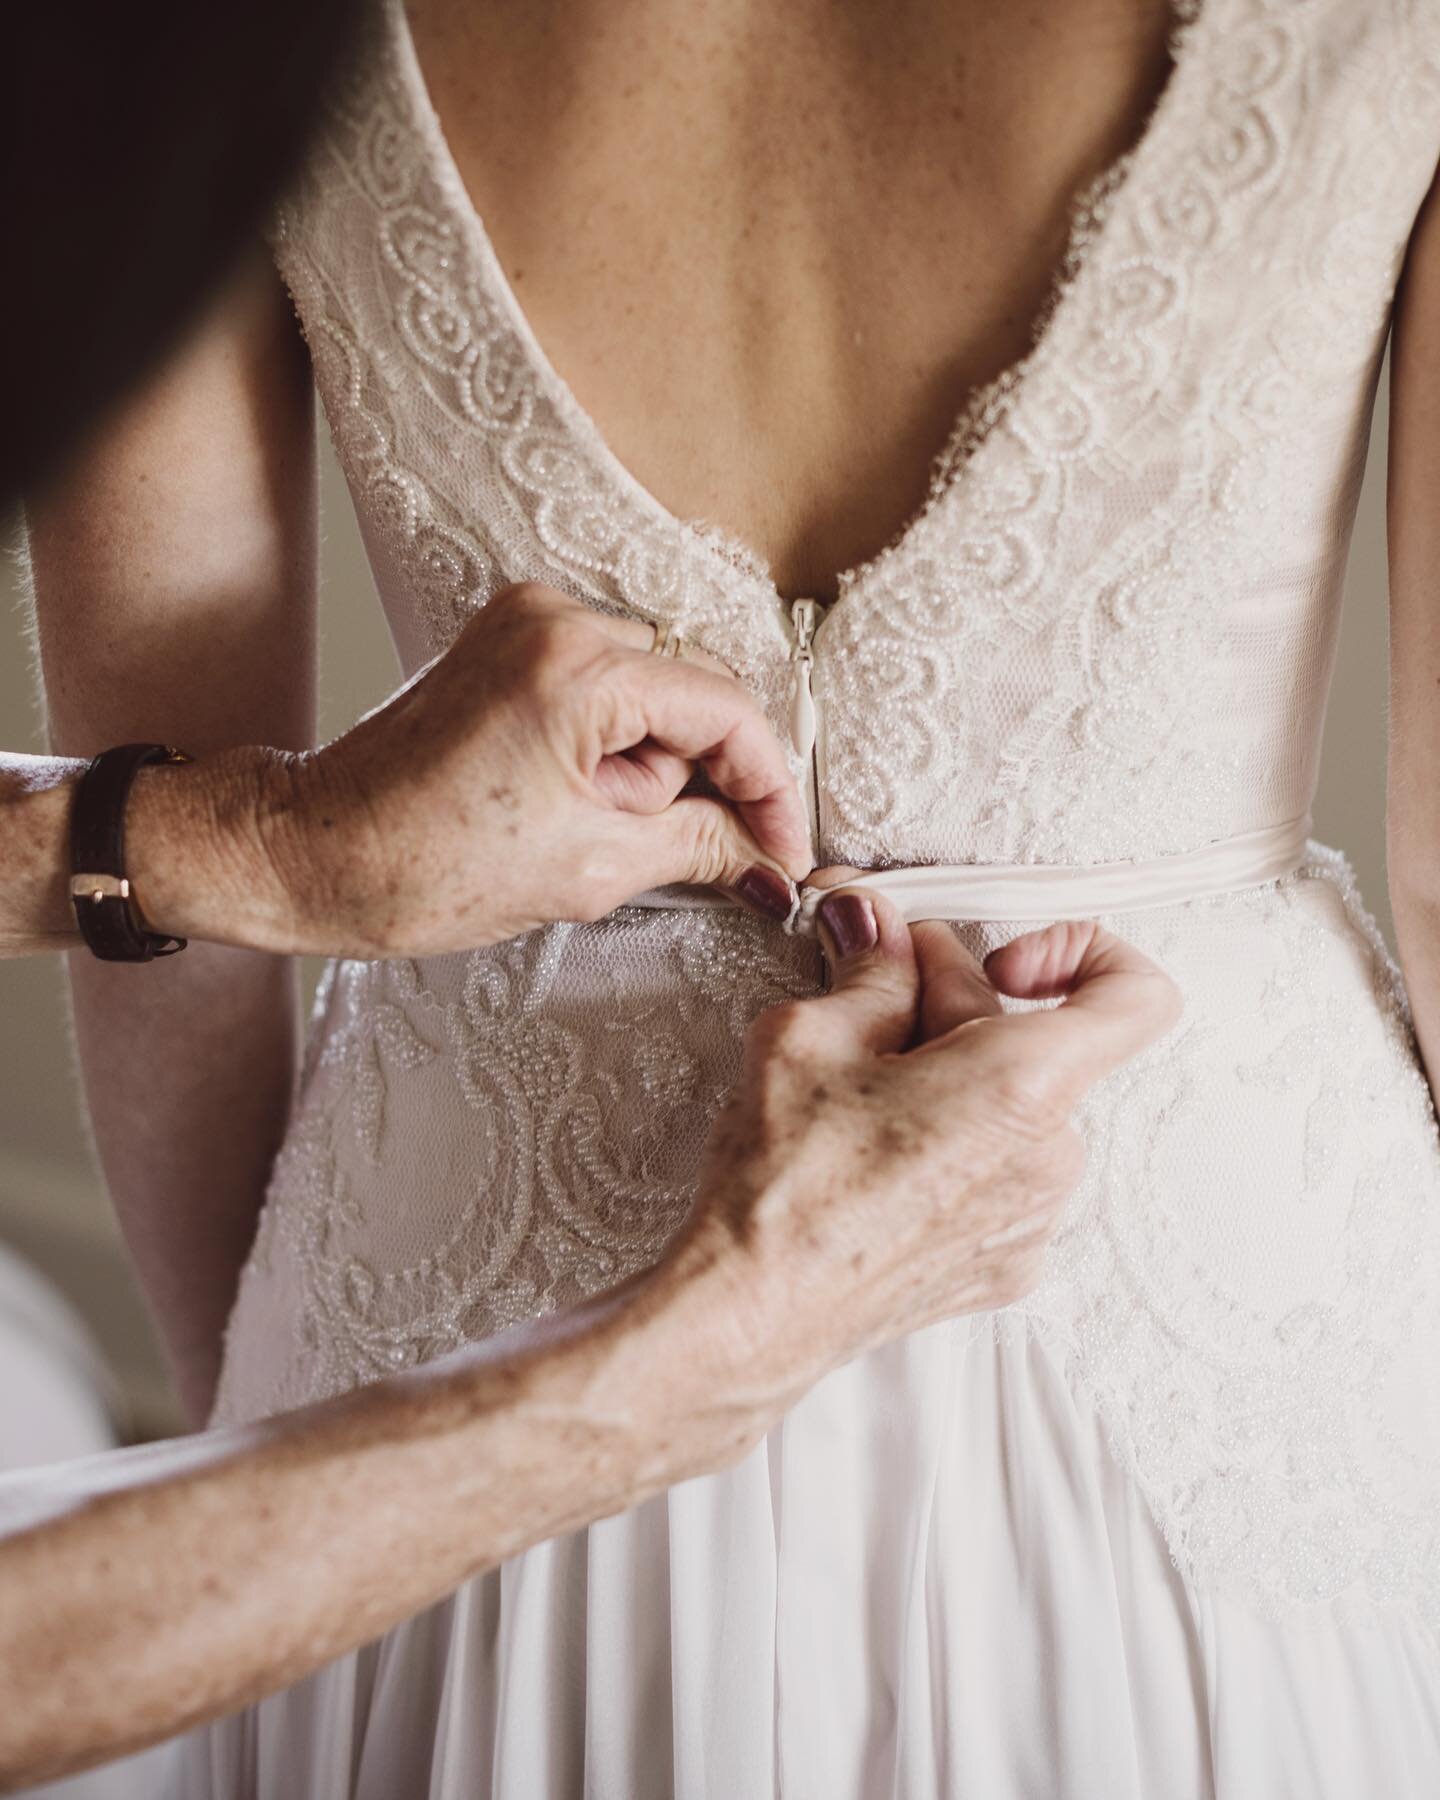 Who helped you get ready for your special day?⁠ 

~Tag your wedding day helpers below~

#weddingdress #wedding #lace #pearls #beading #silk #finishing touches #motherofthebride #weddingday #bride ⁠#marriagecelebrantmelbourne #weddingdressinspo 📷 cre